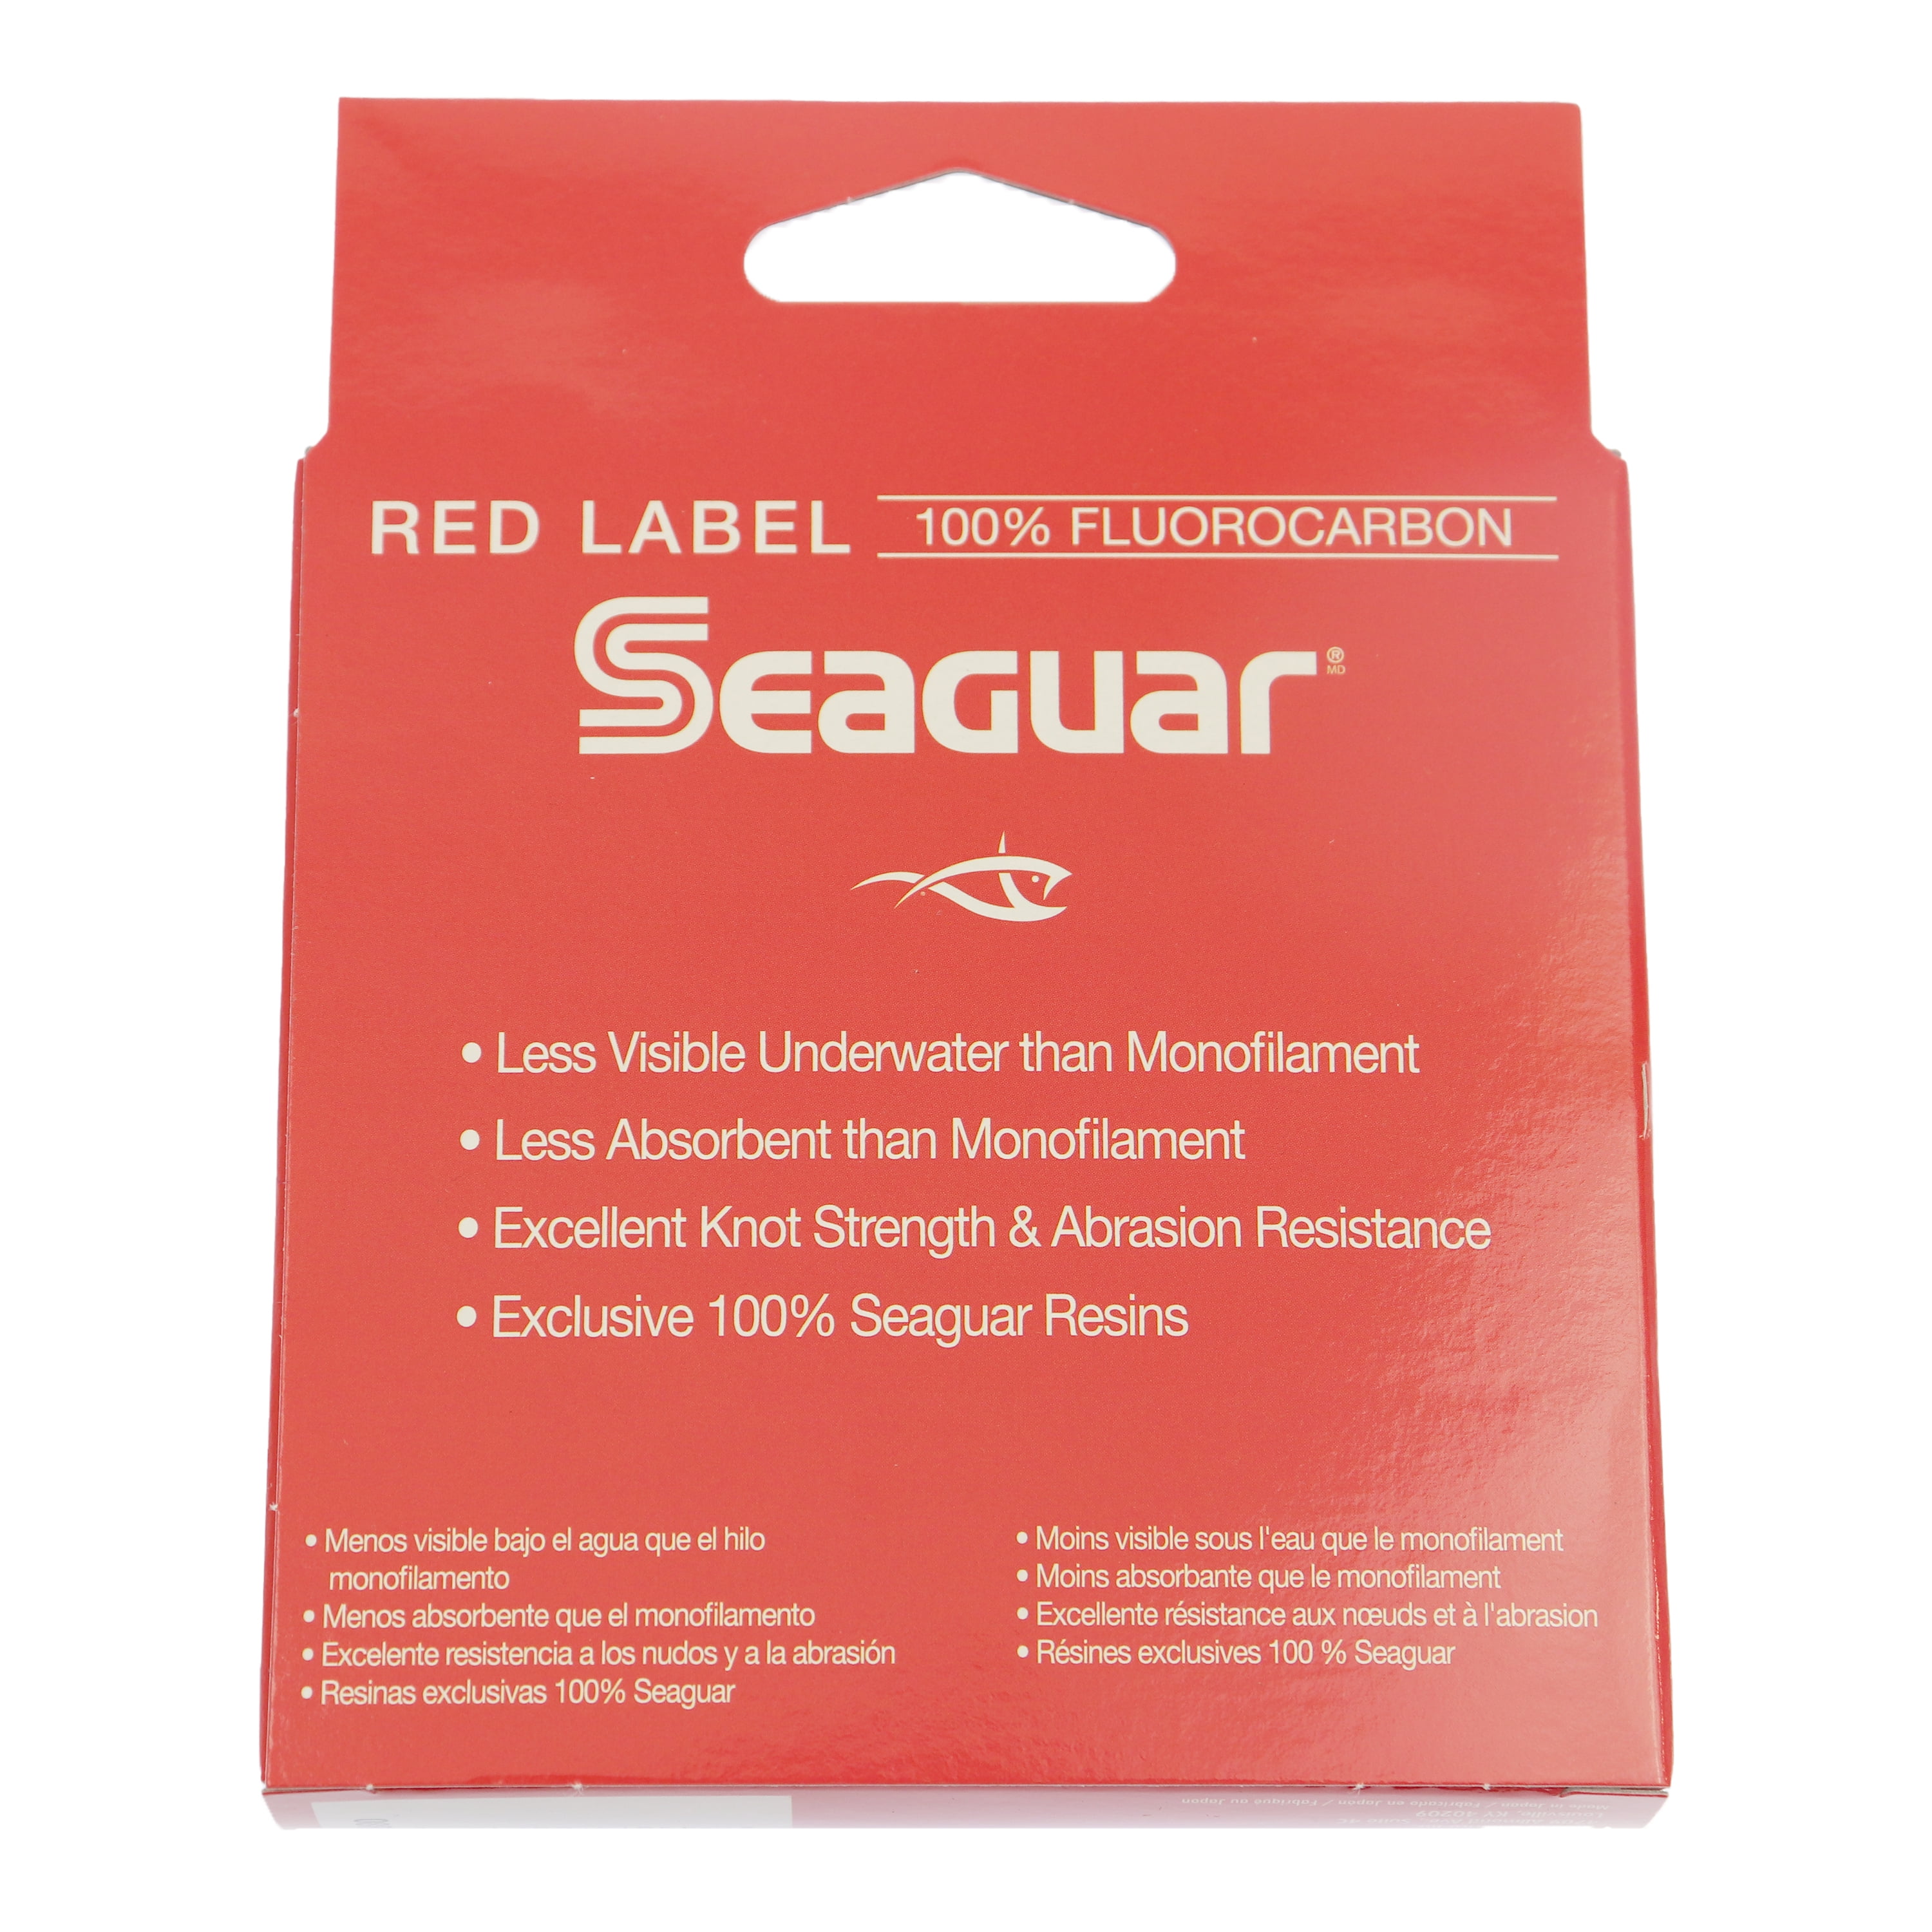 Seaguar Red Label 100% Fluorocarbon Fishing Line 8lbs, 200yds